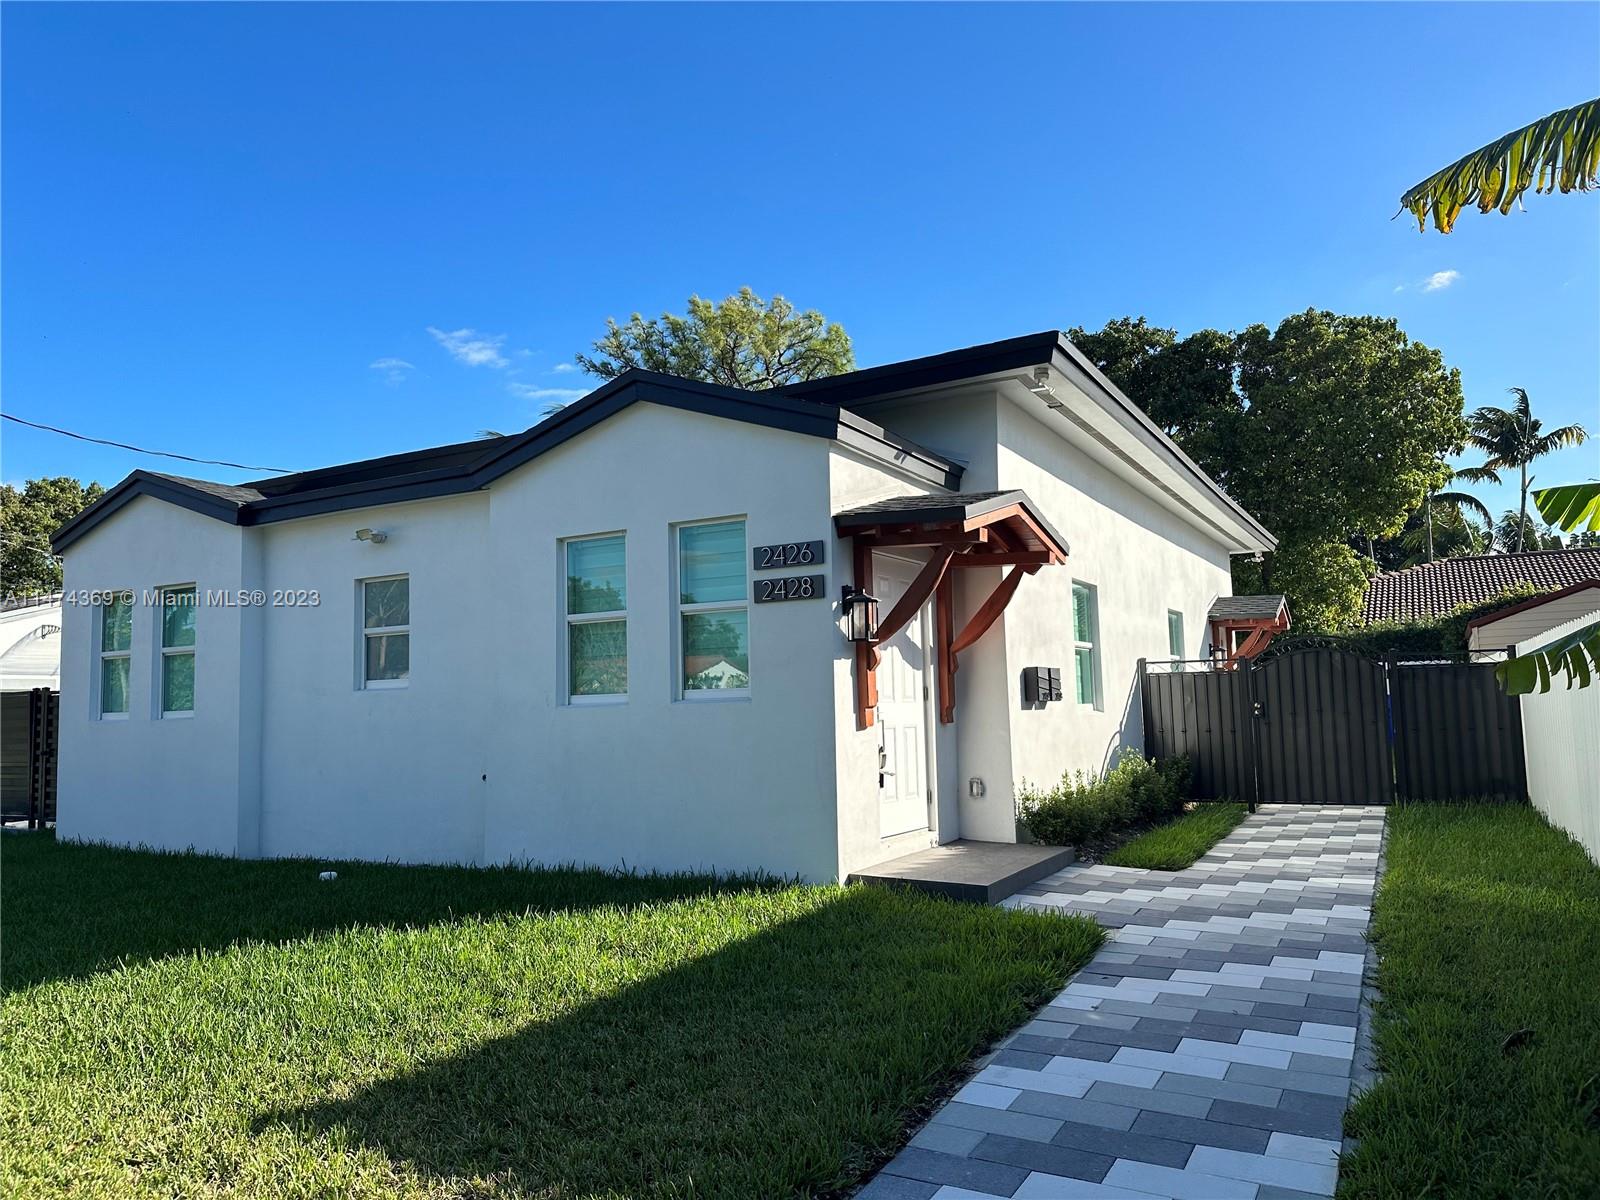 2426 SW 25th St 2426, Miami, Florida 33133, 2 Bedrooms Bedrooms, ,1 BathroomBathrooms,Residentiallease,For Rent,2426 SW 25th St 2426,A11474369